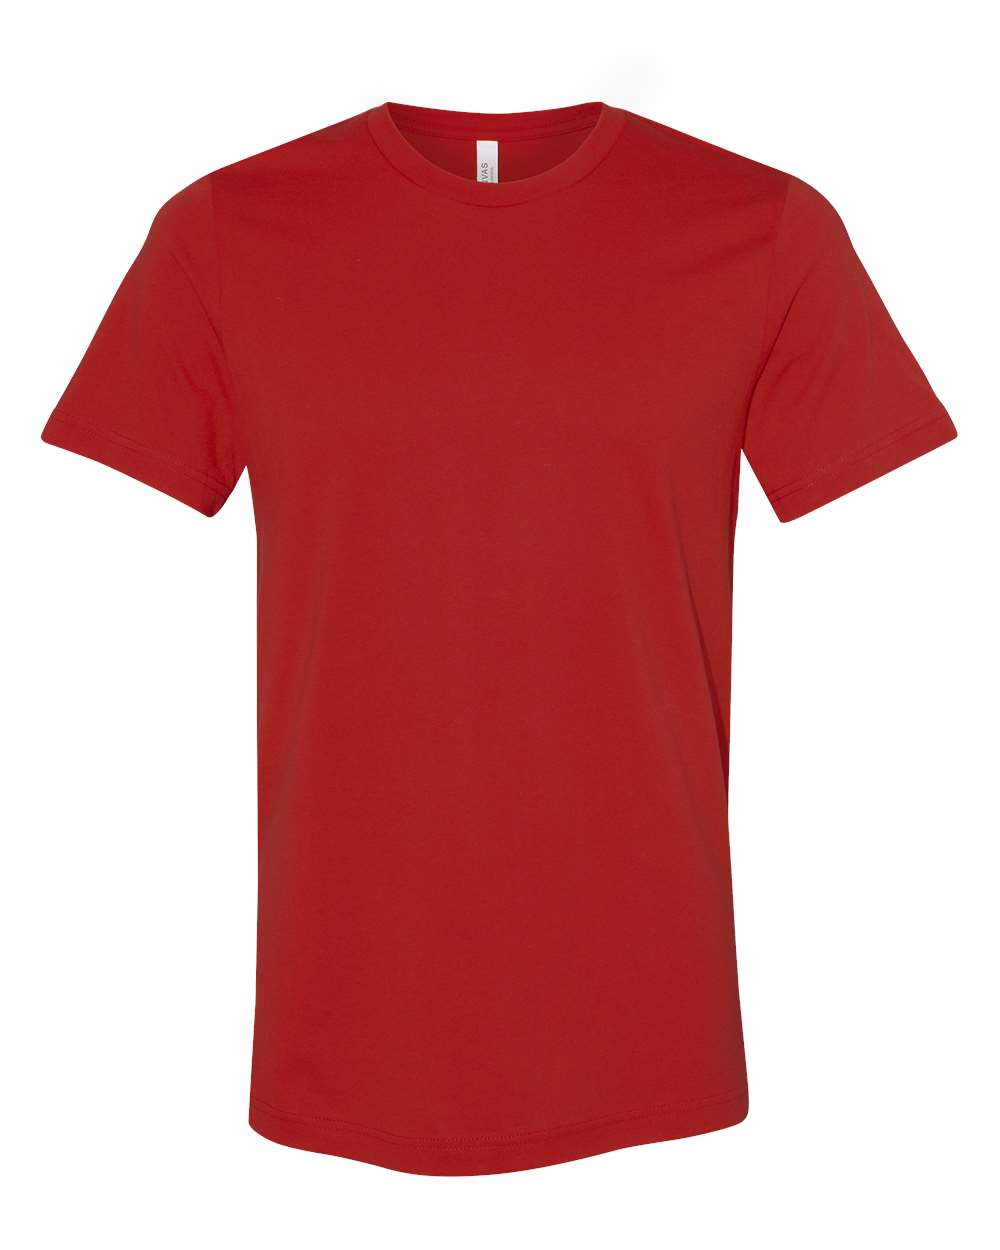 bella+canvas adult short sleeve tee red